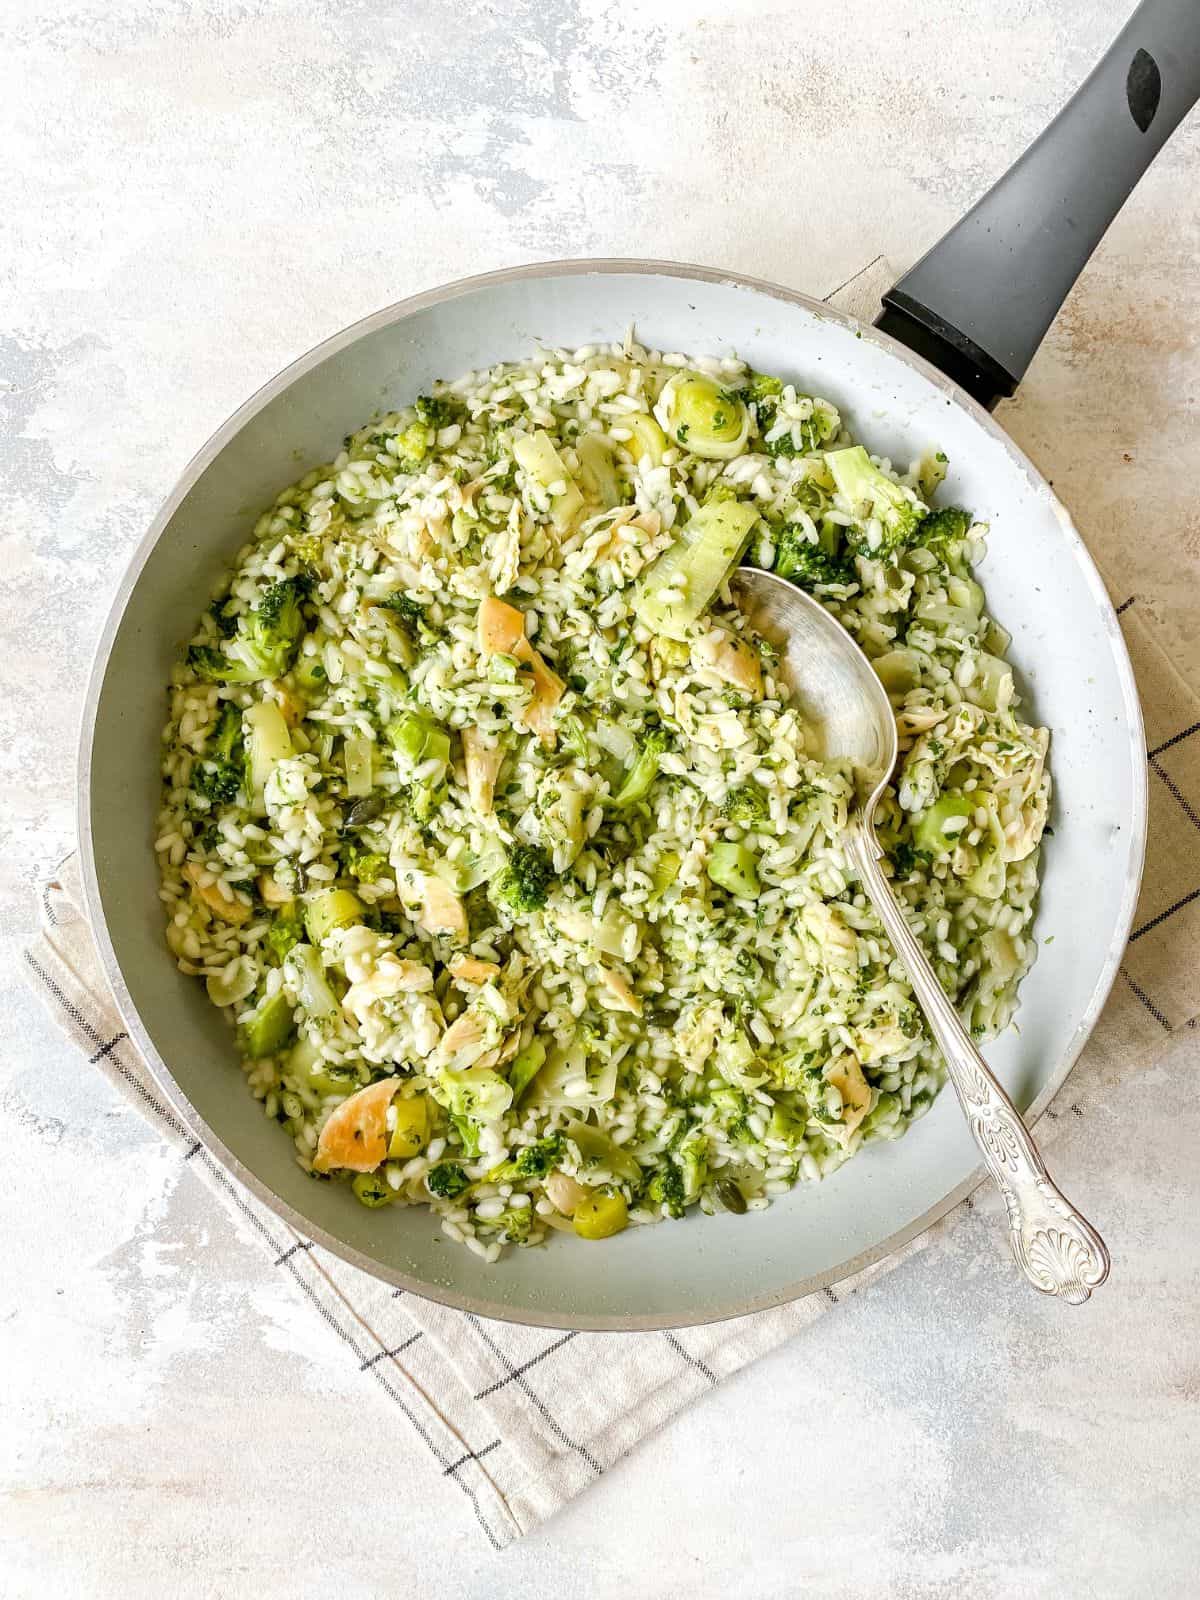 pesto chicken risotto in a light grey skillet on a checked cloth.